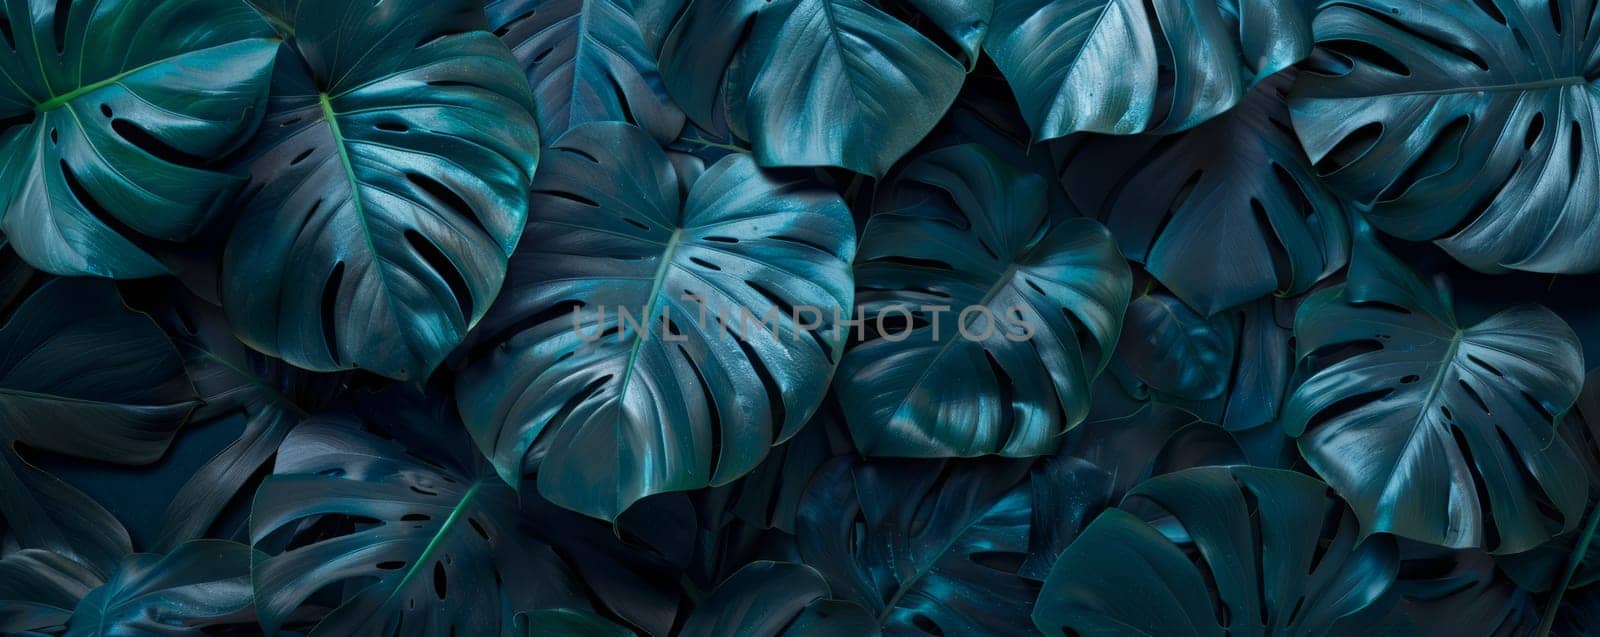 Monstera leafs background suitable for wallpaper or to represent as backdrop or mockup. by yom98